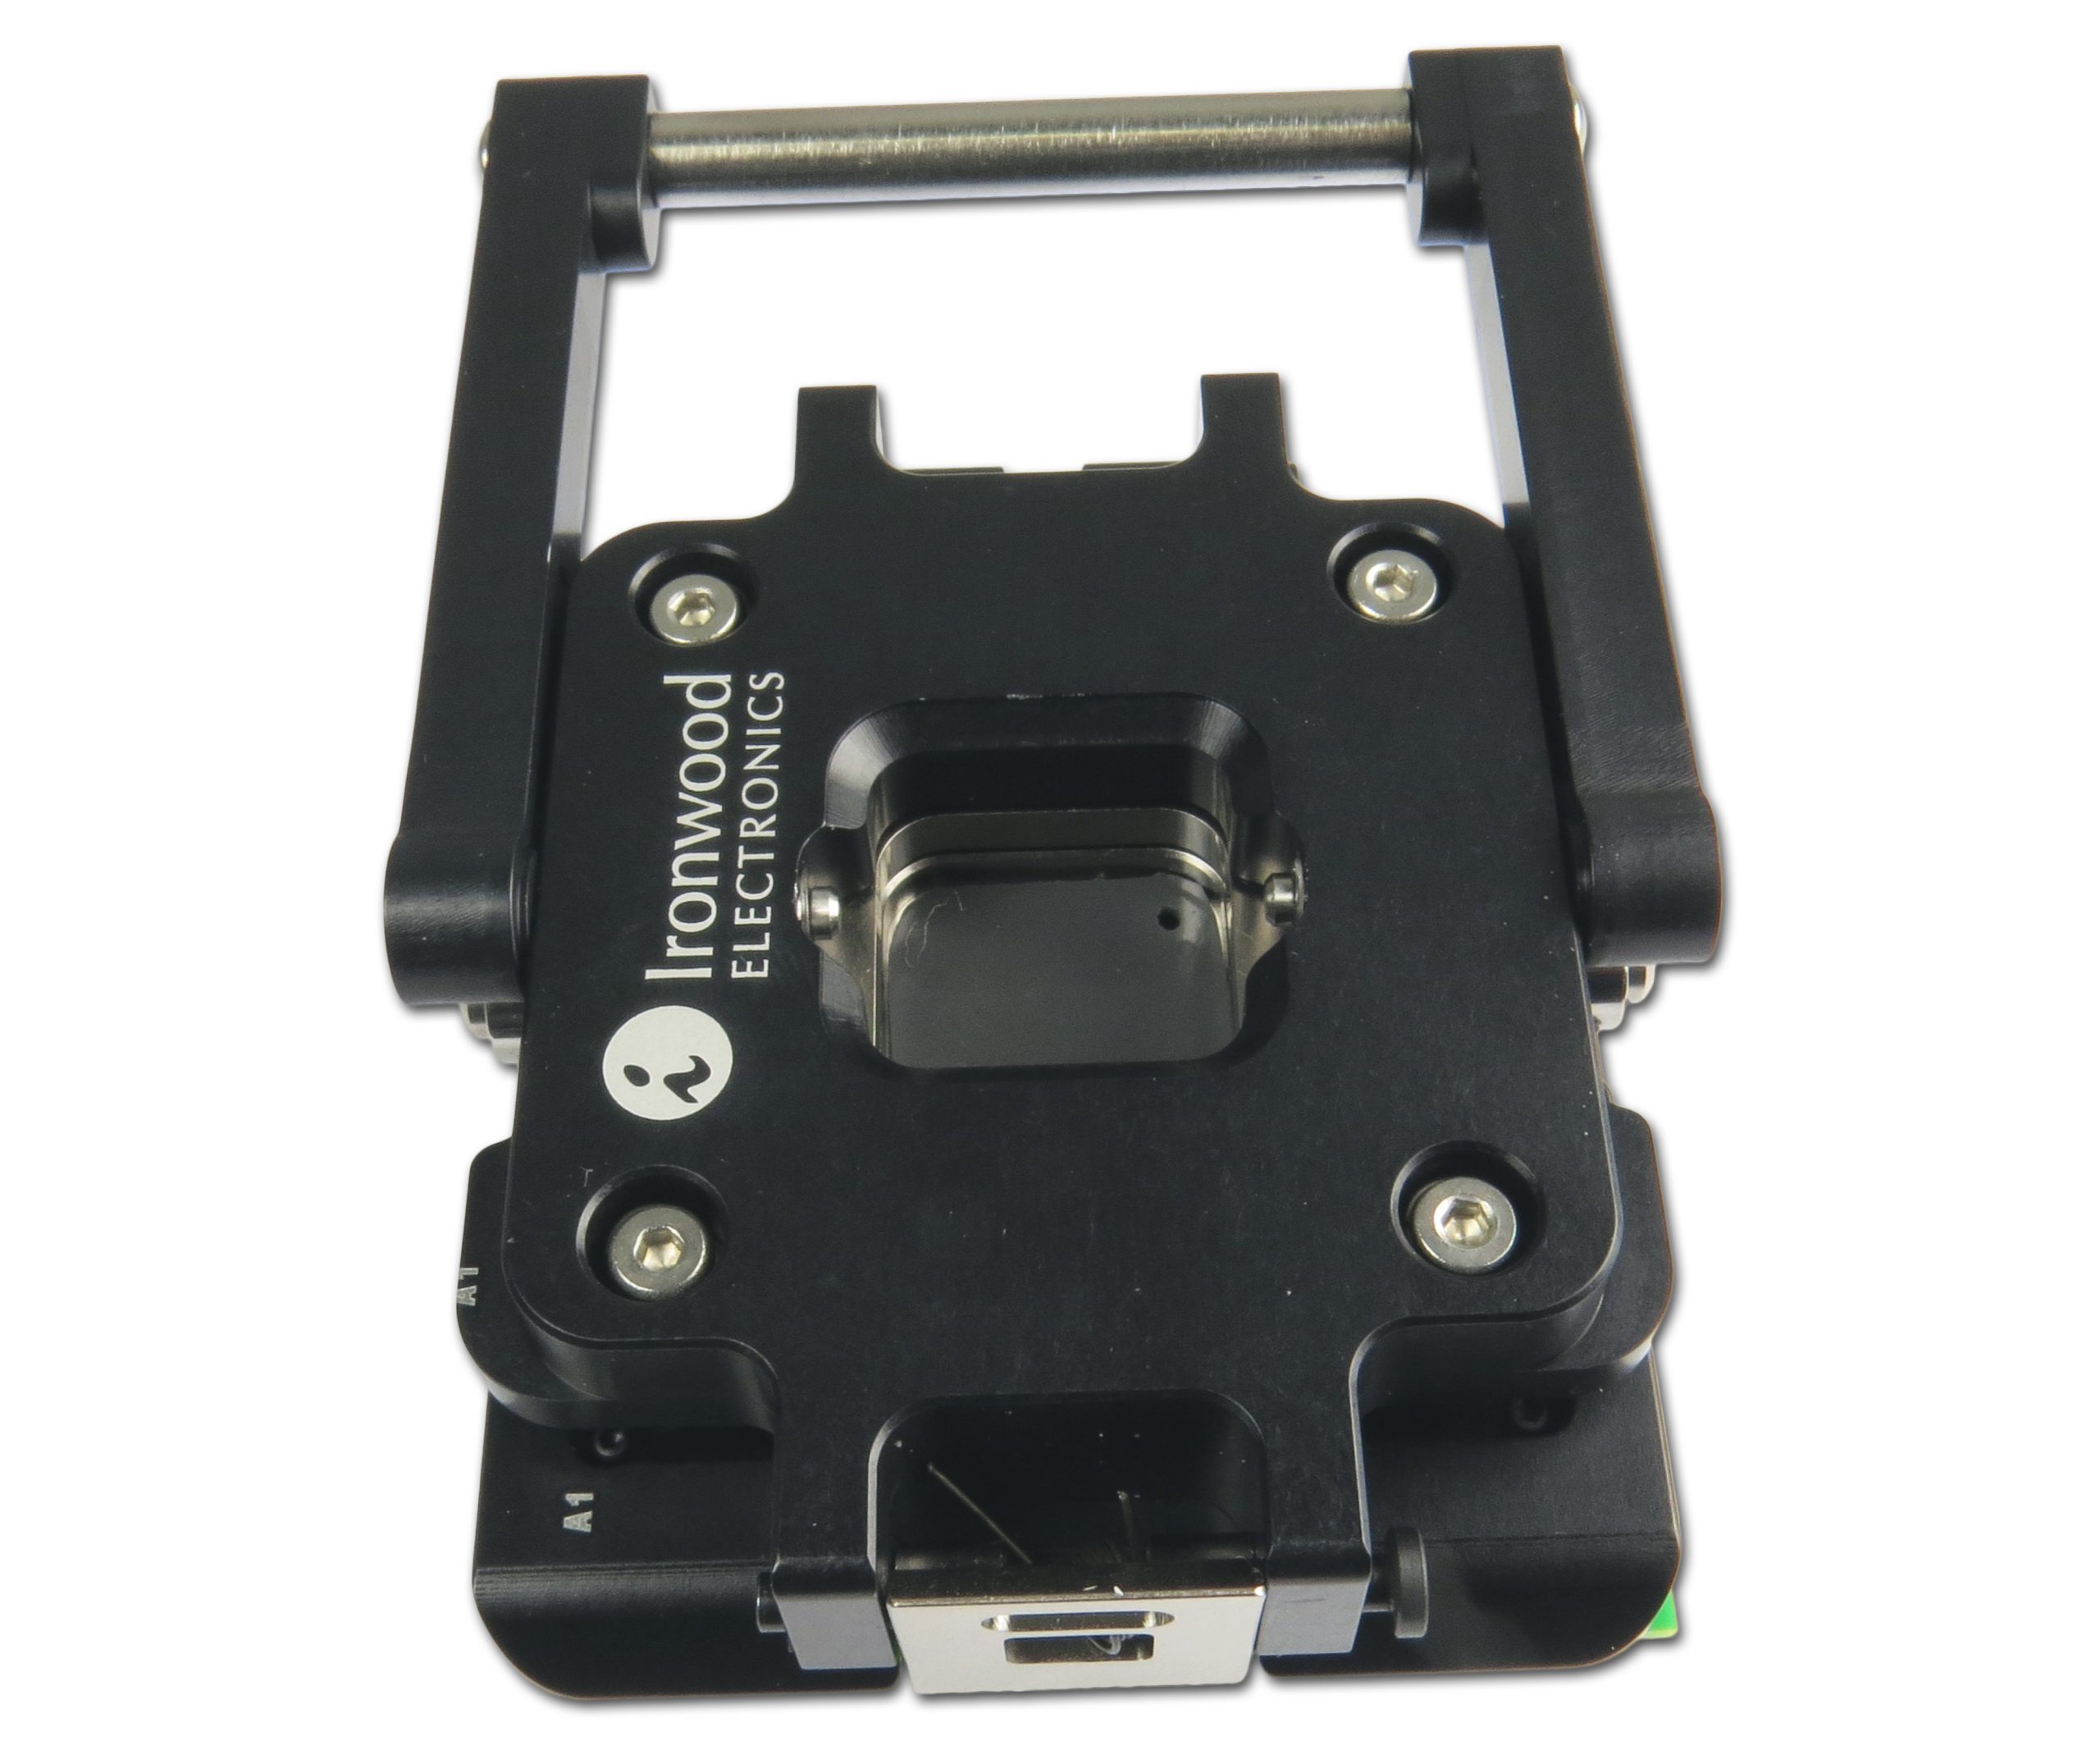 Clamshell Socket for 1mm Pitch Xilinx FF2104